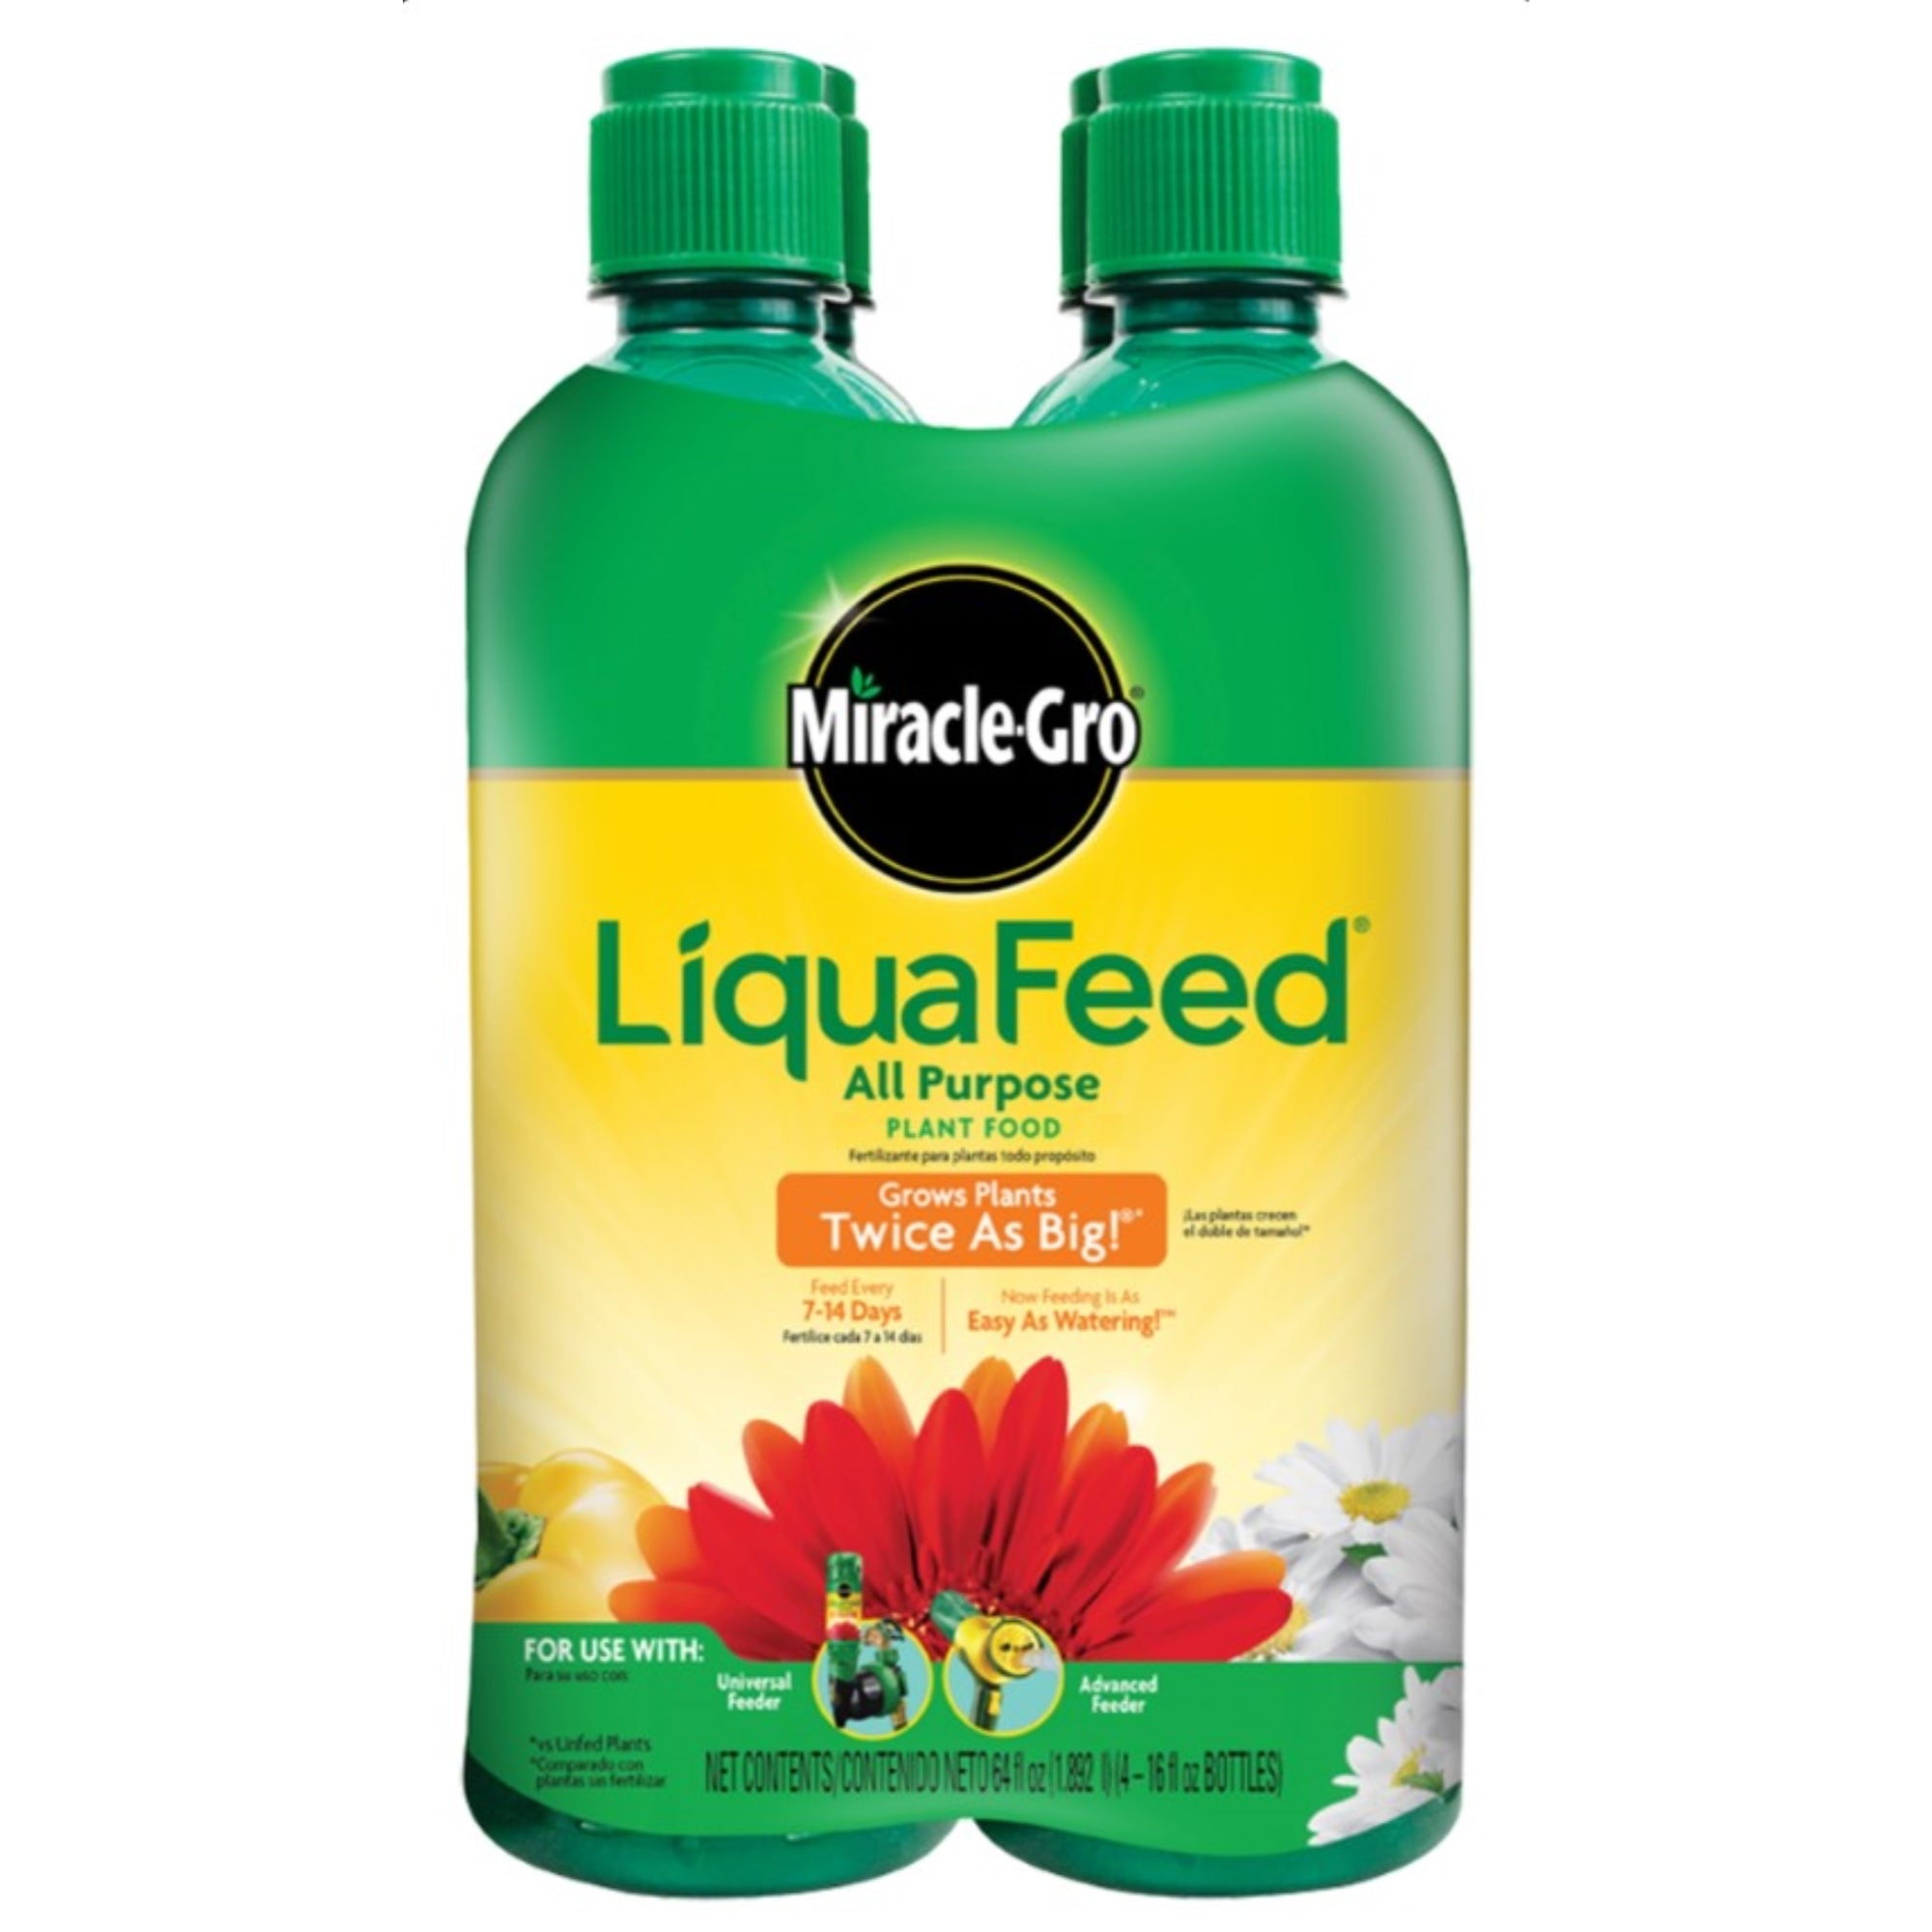 Miracle-Gro Liquafeed All Purpose Plant Food, 16 oz, 4 Pack